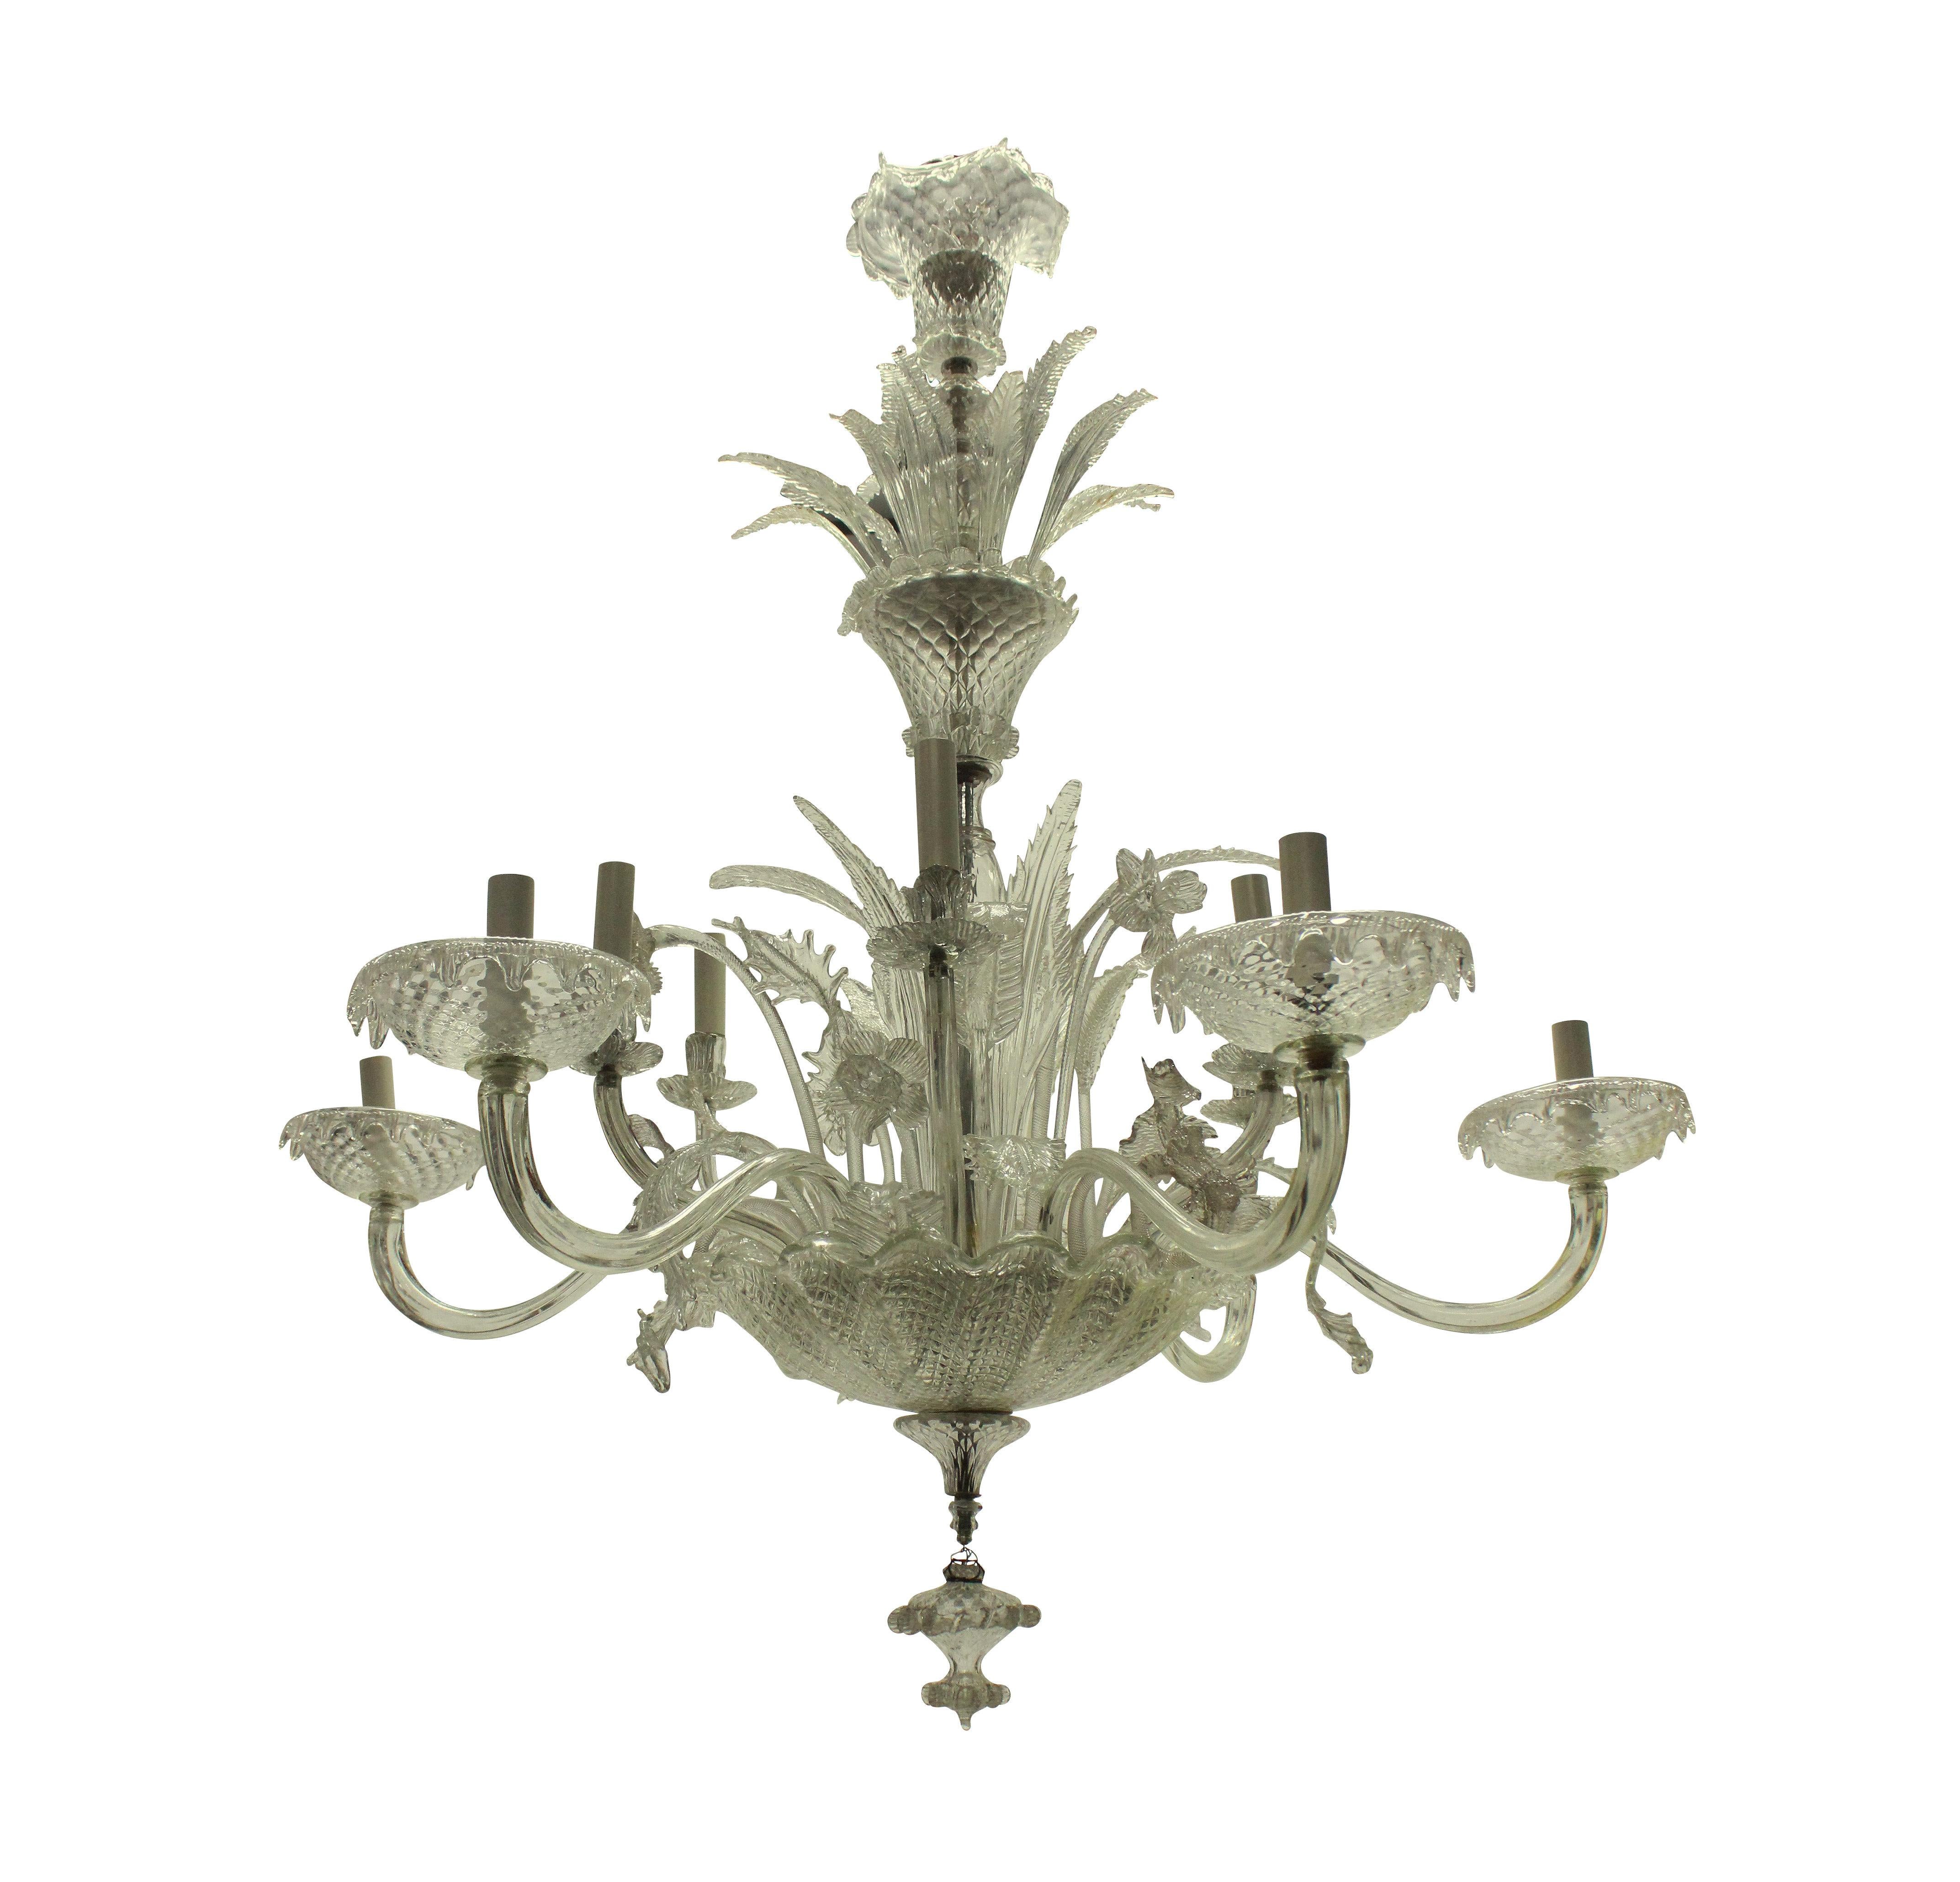 A large Italian Murano glass chandelier of fine quality, with twelve arms, extending from a large patterned receiver dish with finial. The upper section profusely decorated with foliage and the central stem with a basket containing foliage and